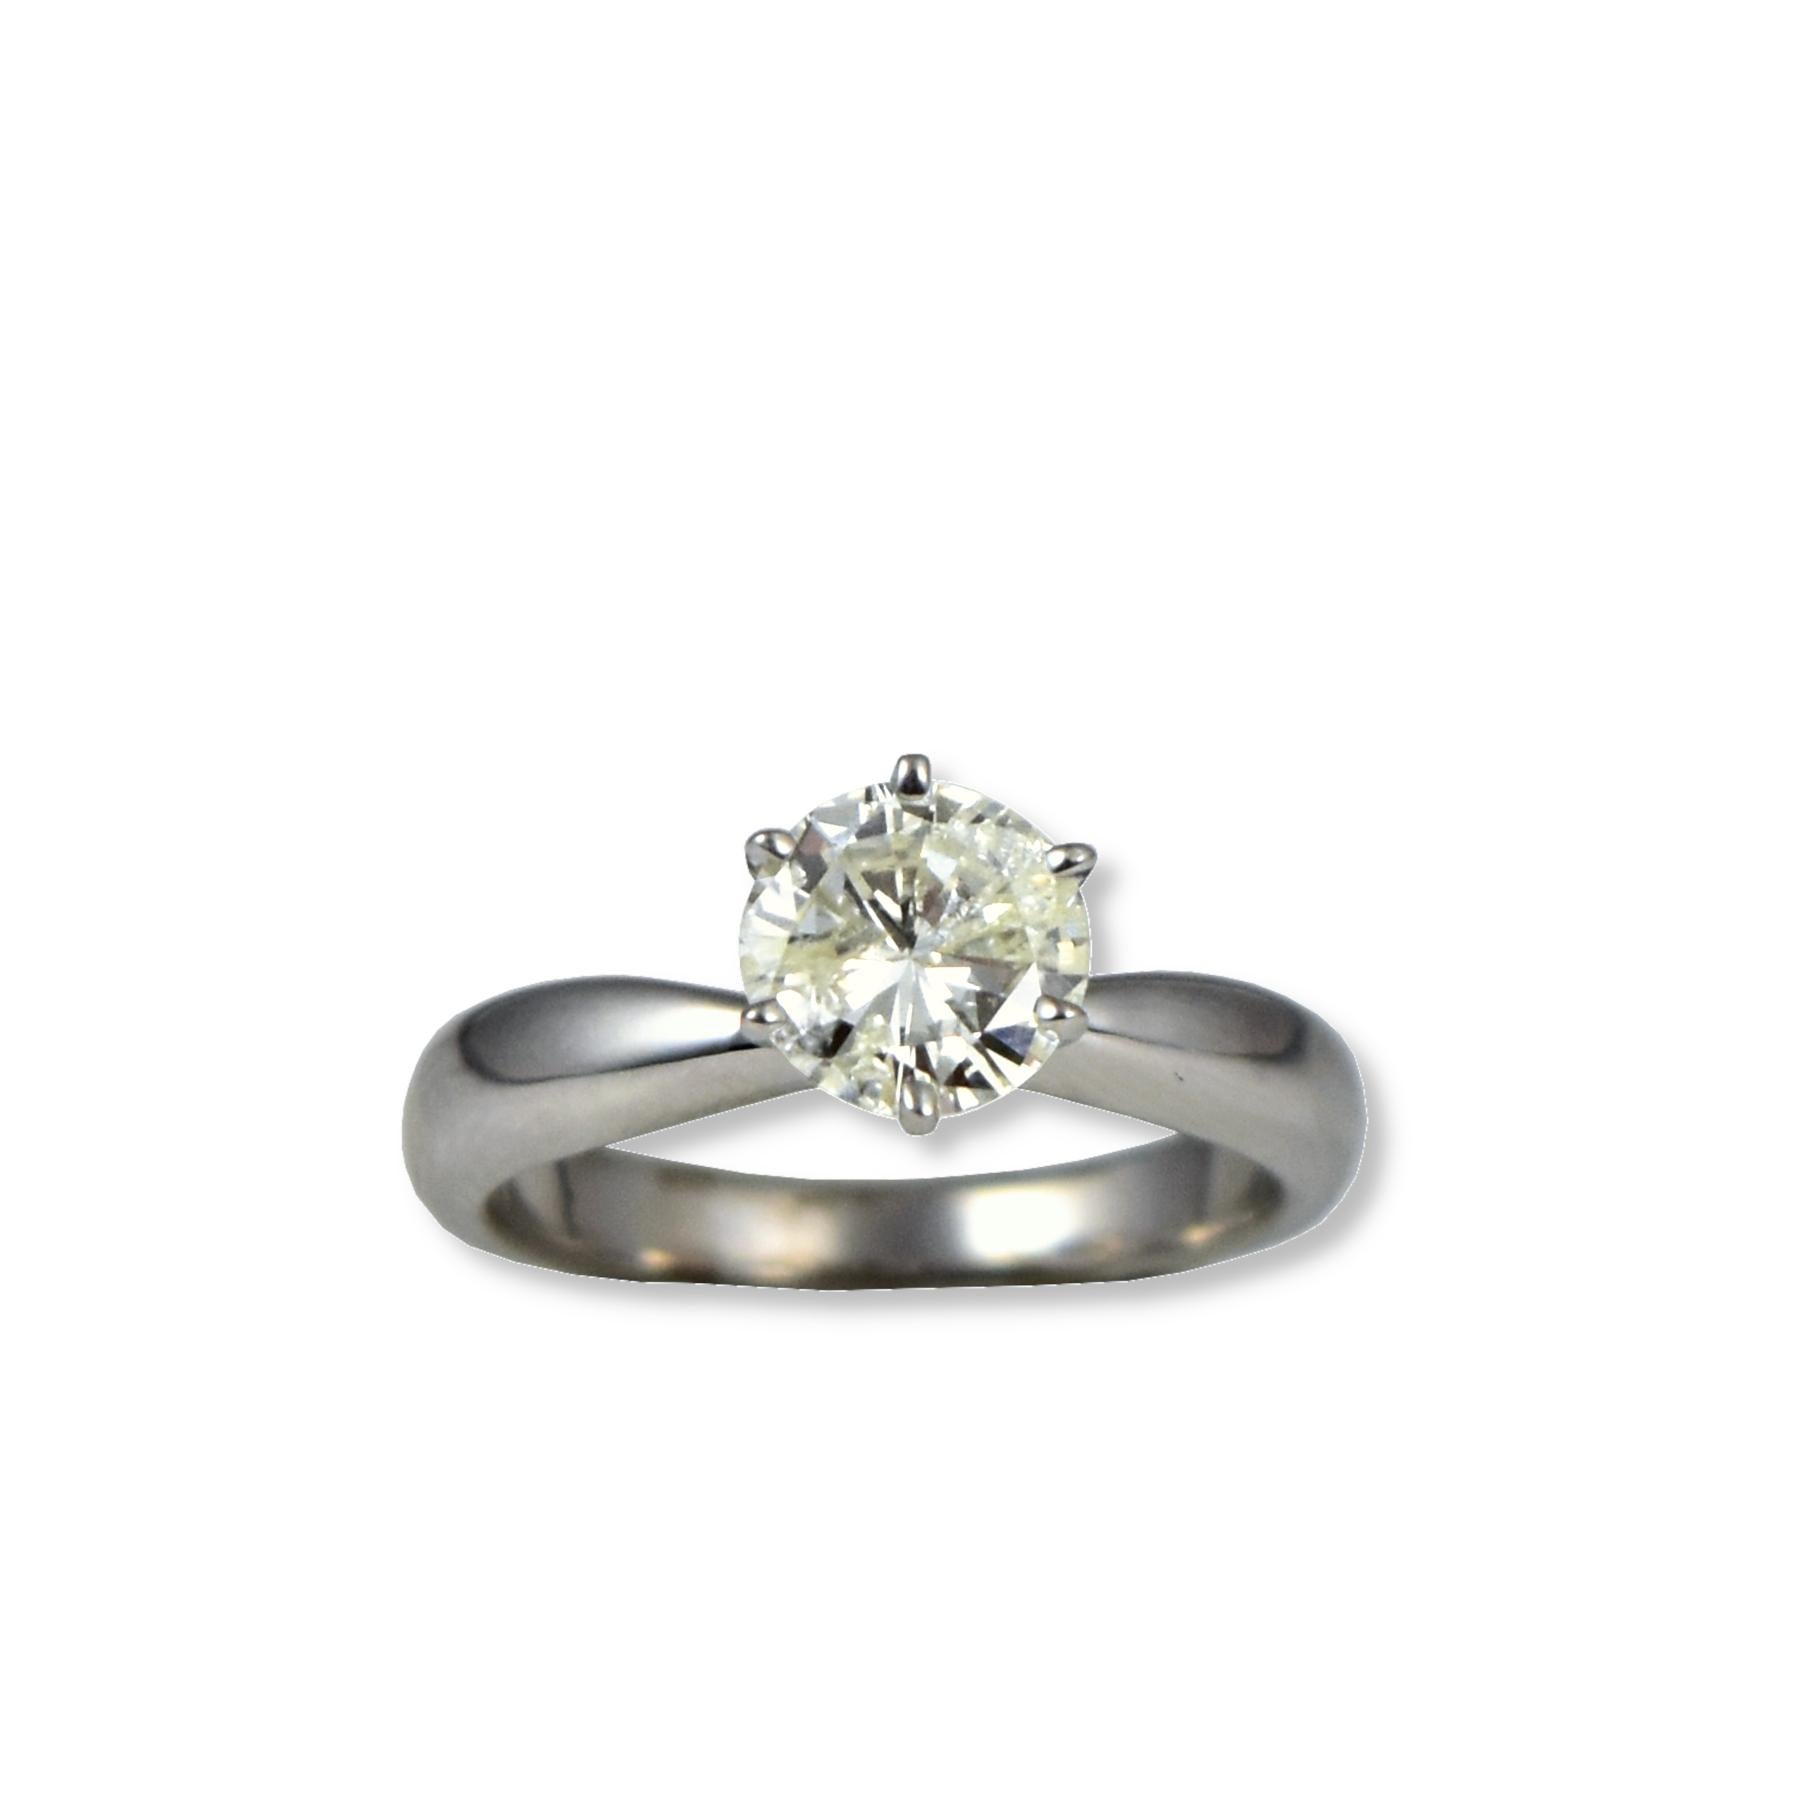 Round Cut 1.12 Ct Round Brilliant Cut Diamond Solitaire Engagement Ring in White Gold